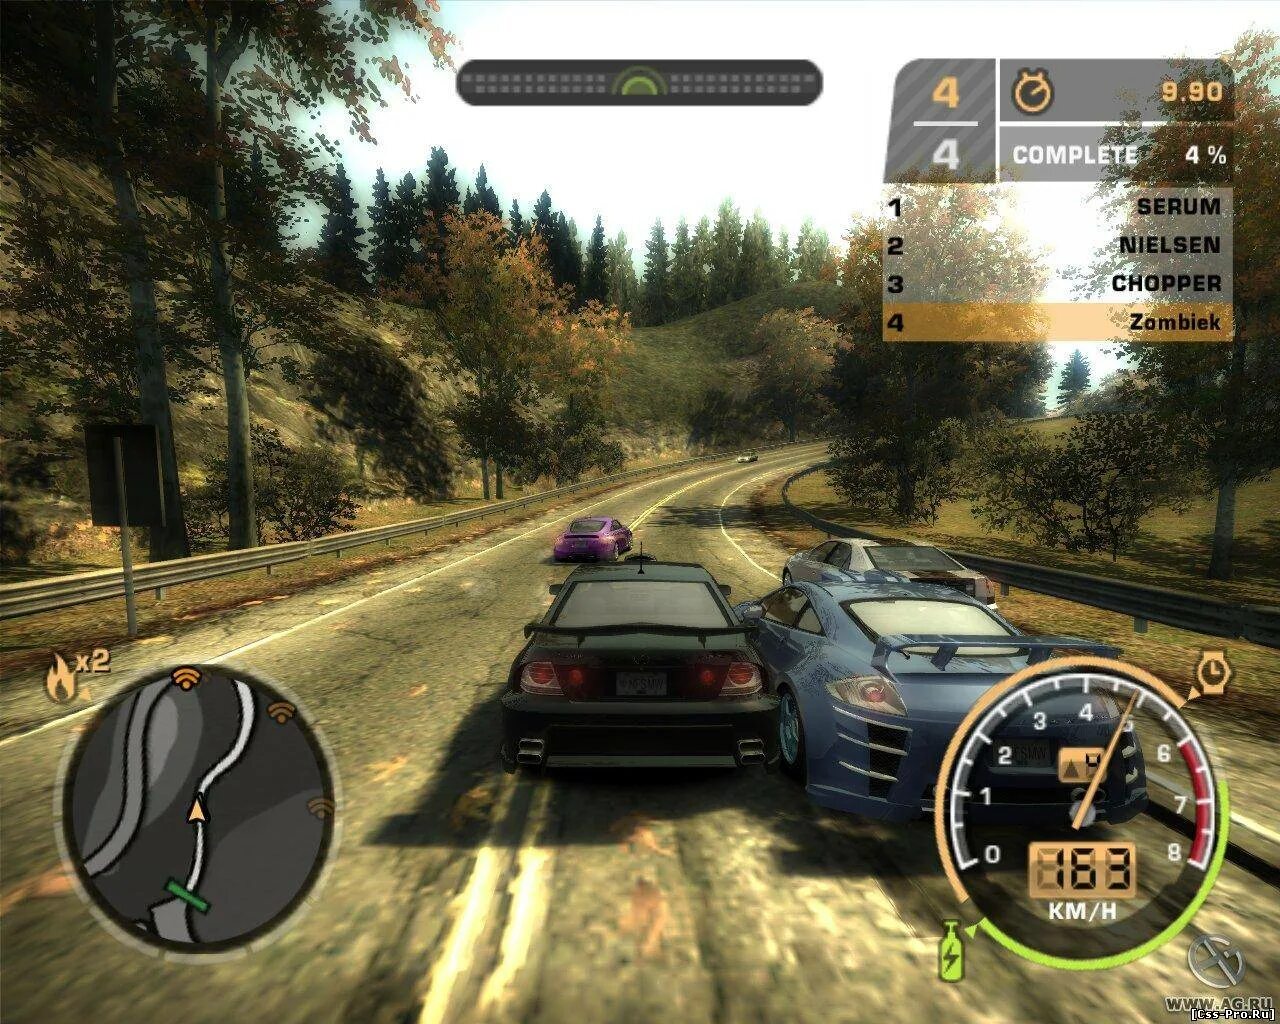 Гонки NFS most wanted Black Edition. Мост вантед 2005. NFS most wanted 2005 Black Edition. Игра most wanted 2005. На компьютер most wanted